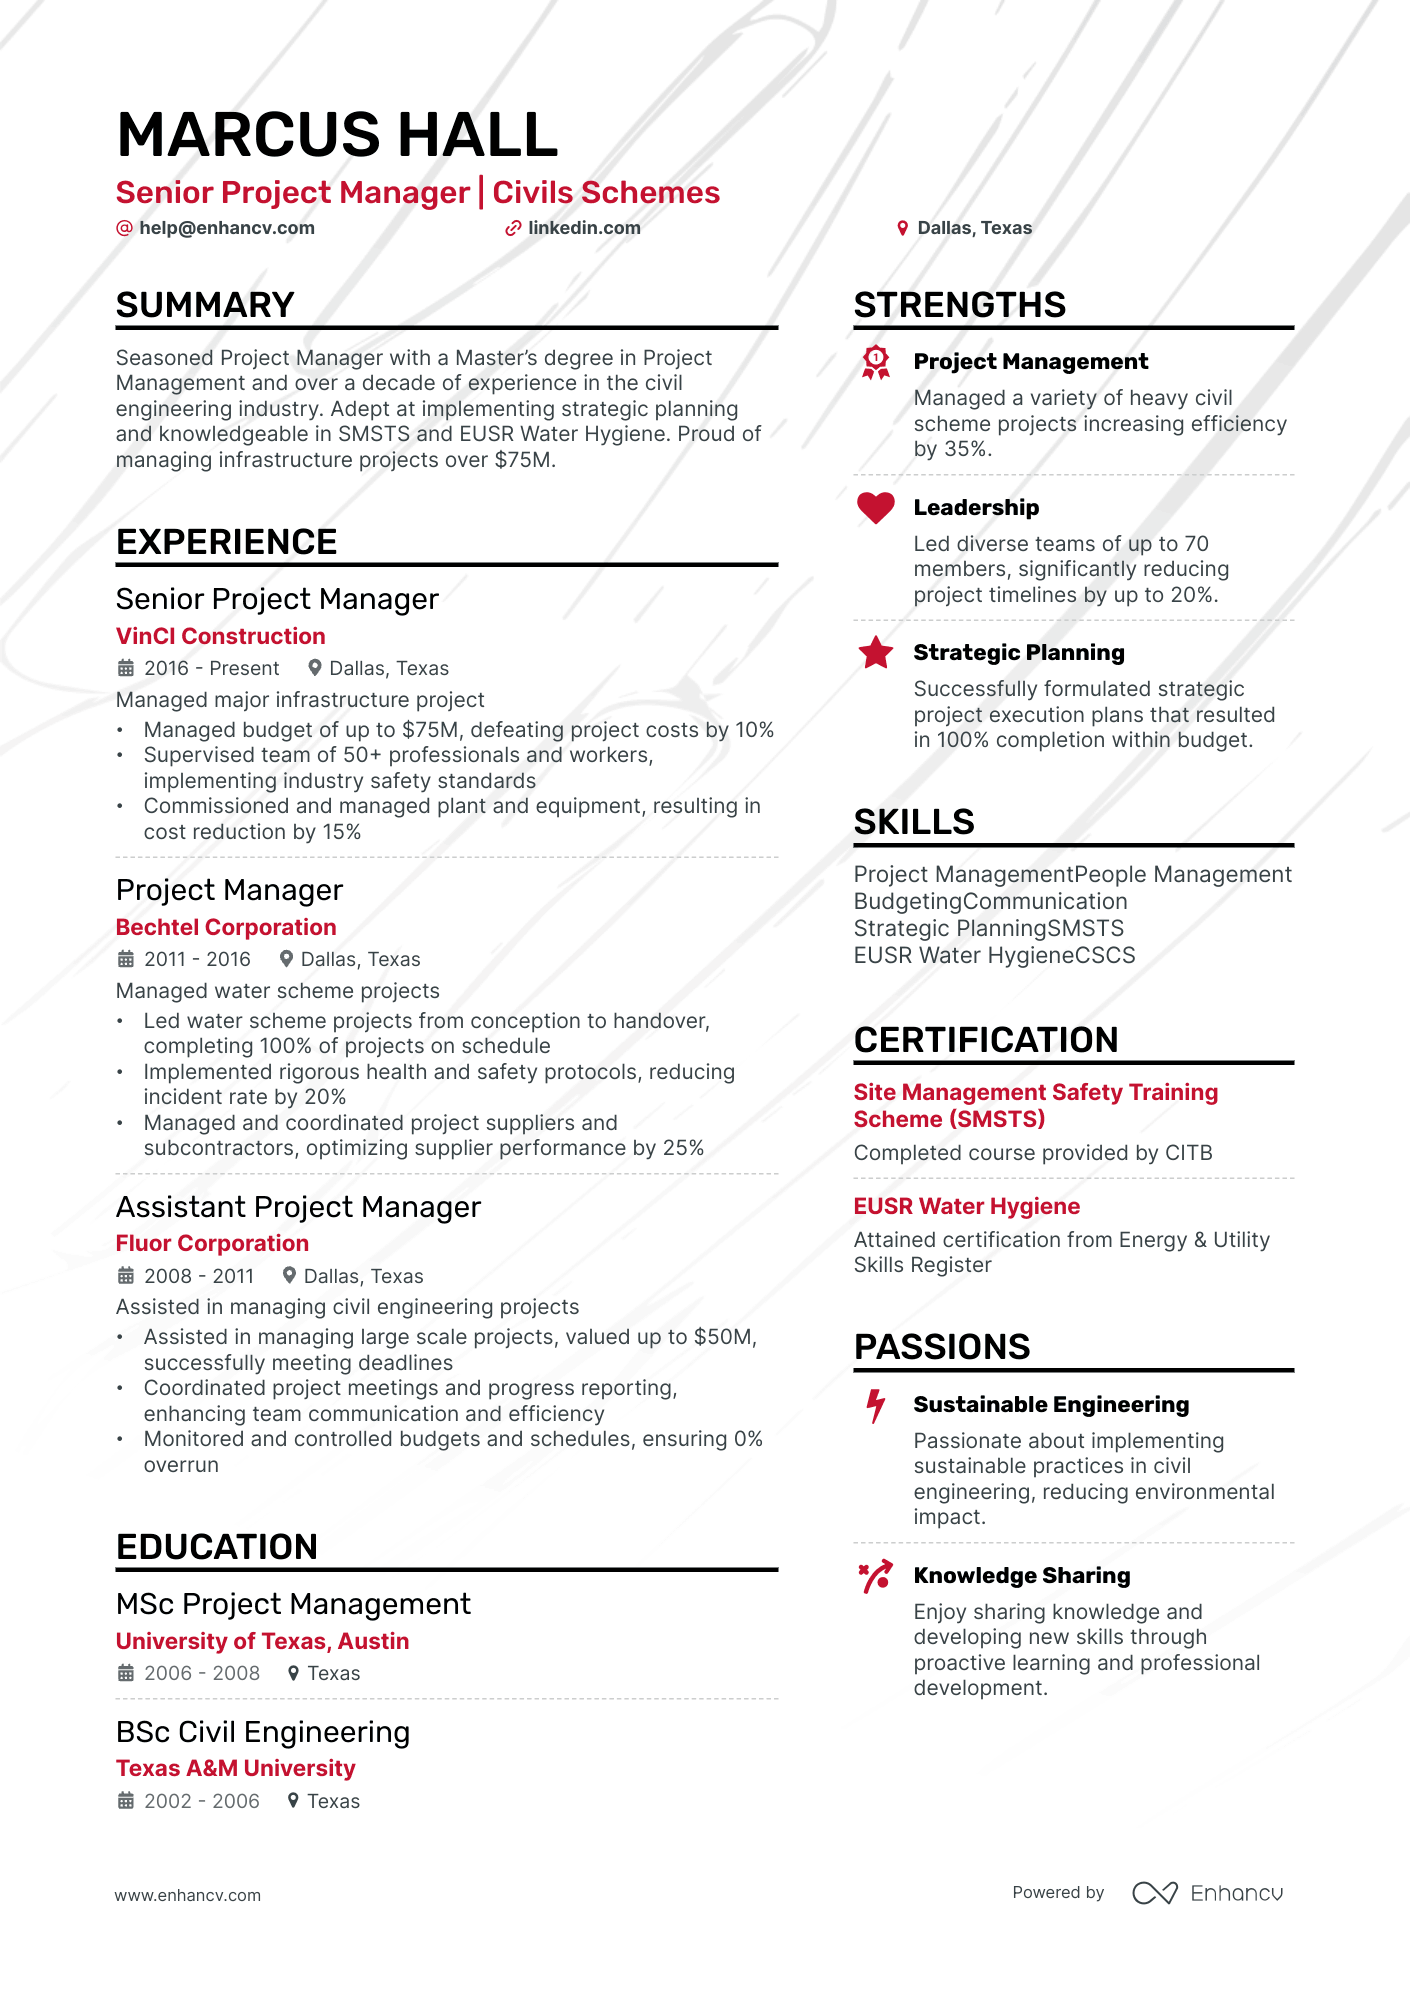 Senior Project Manager resume example